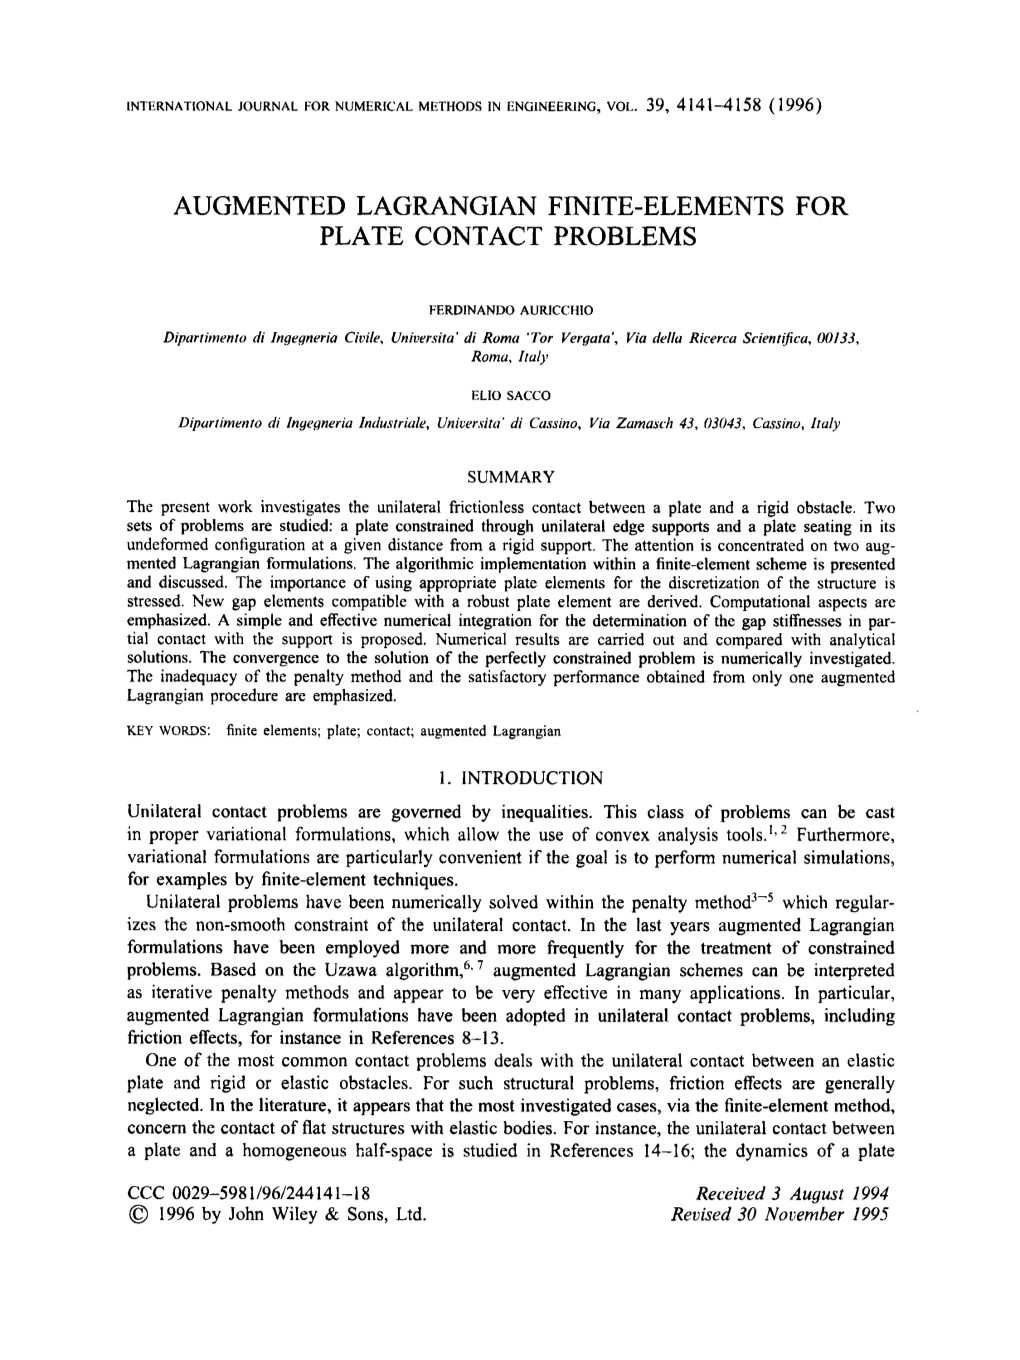 Augmented Lagrangian Finite-Elements for Plate Contact Problems